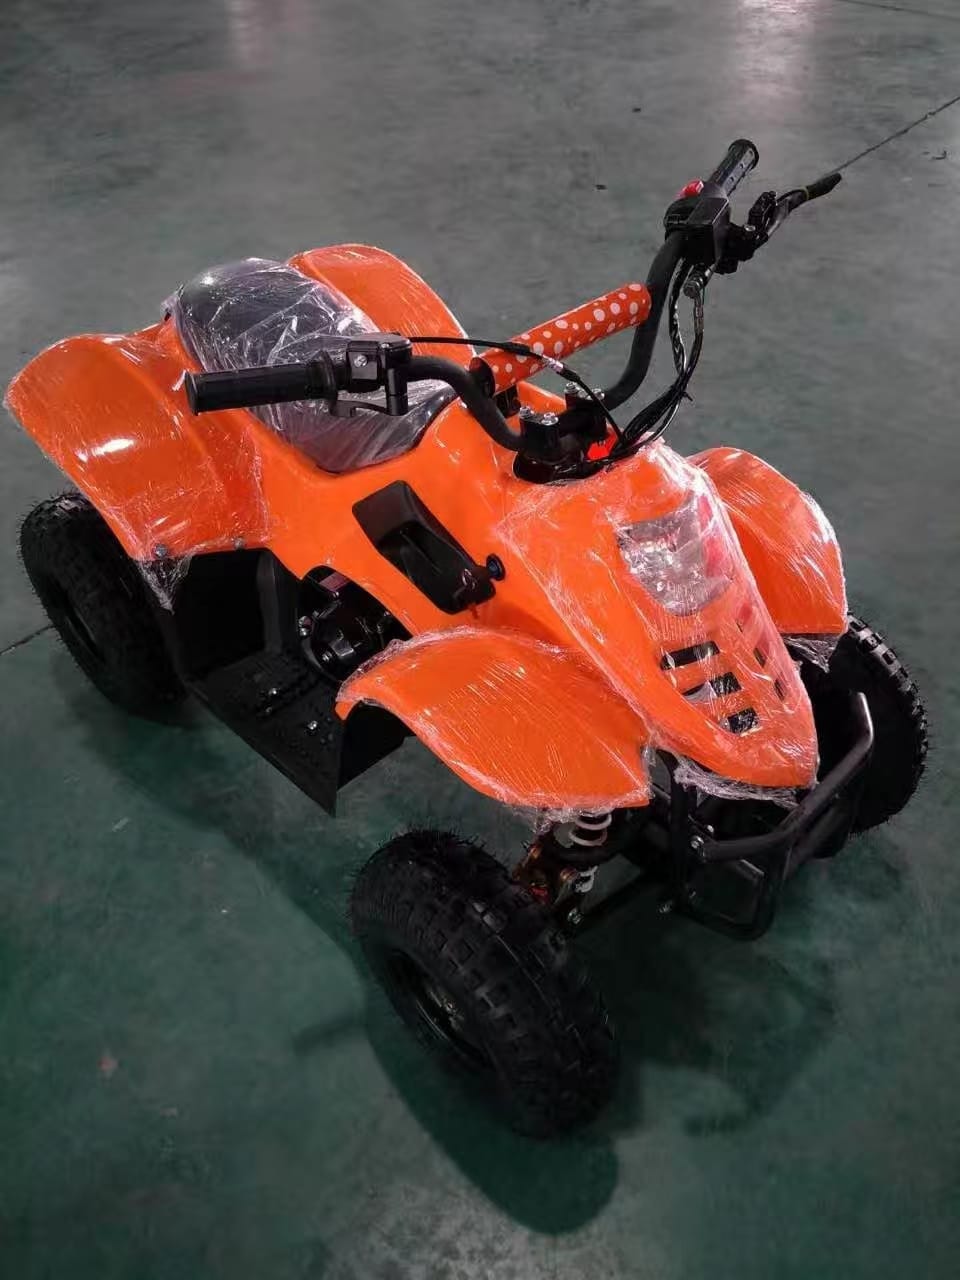 COOLBABY A7-02 ATV 110cc Single Cylinder, 4 Stroke Air Cooled Engine - COOLBABY